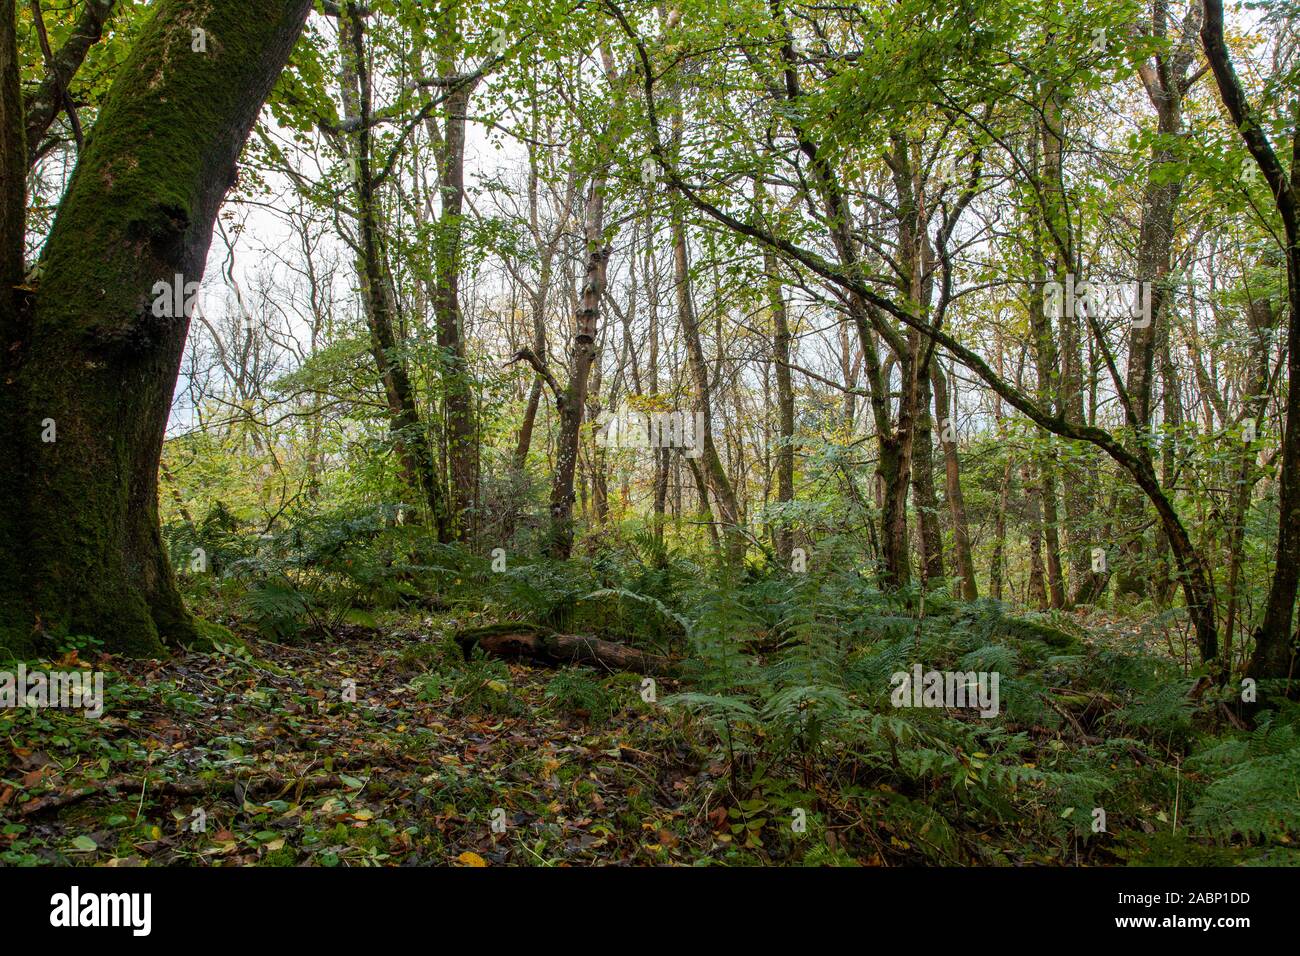 Understory plants in Duncliffe Wood, a Woodland Trust reserve near Shaftesbury, Dorset, England Stock Photo